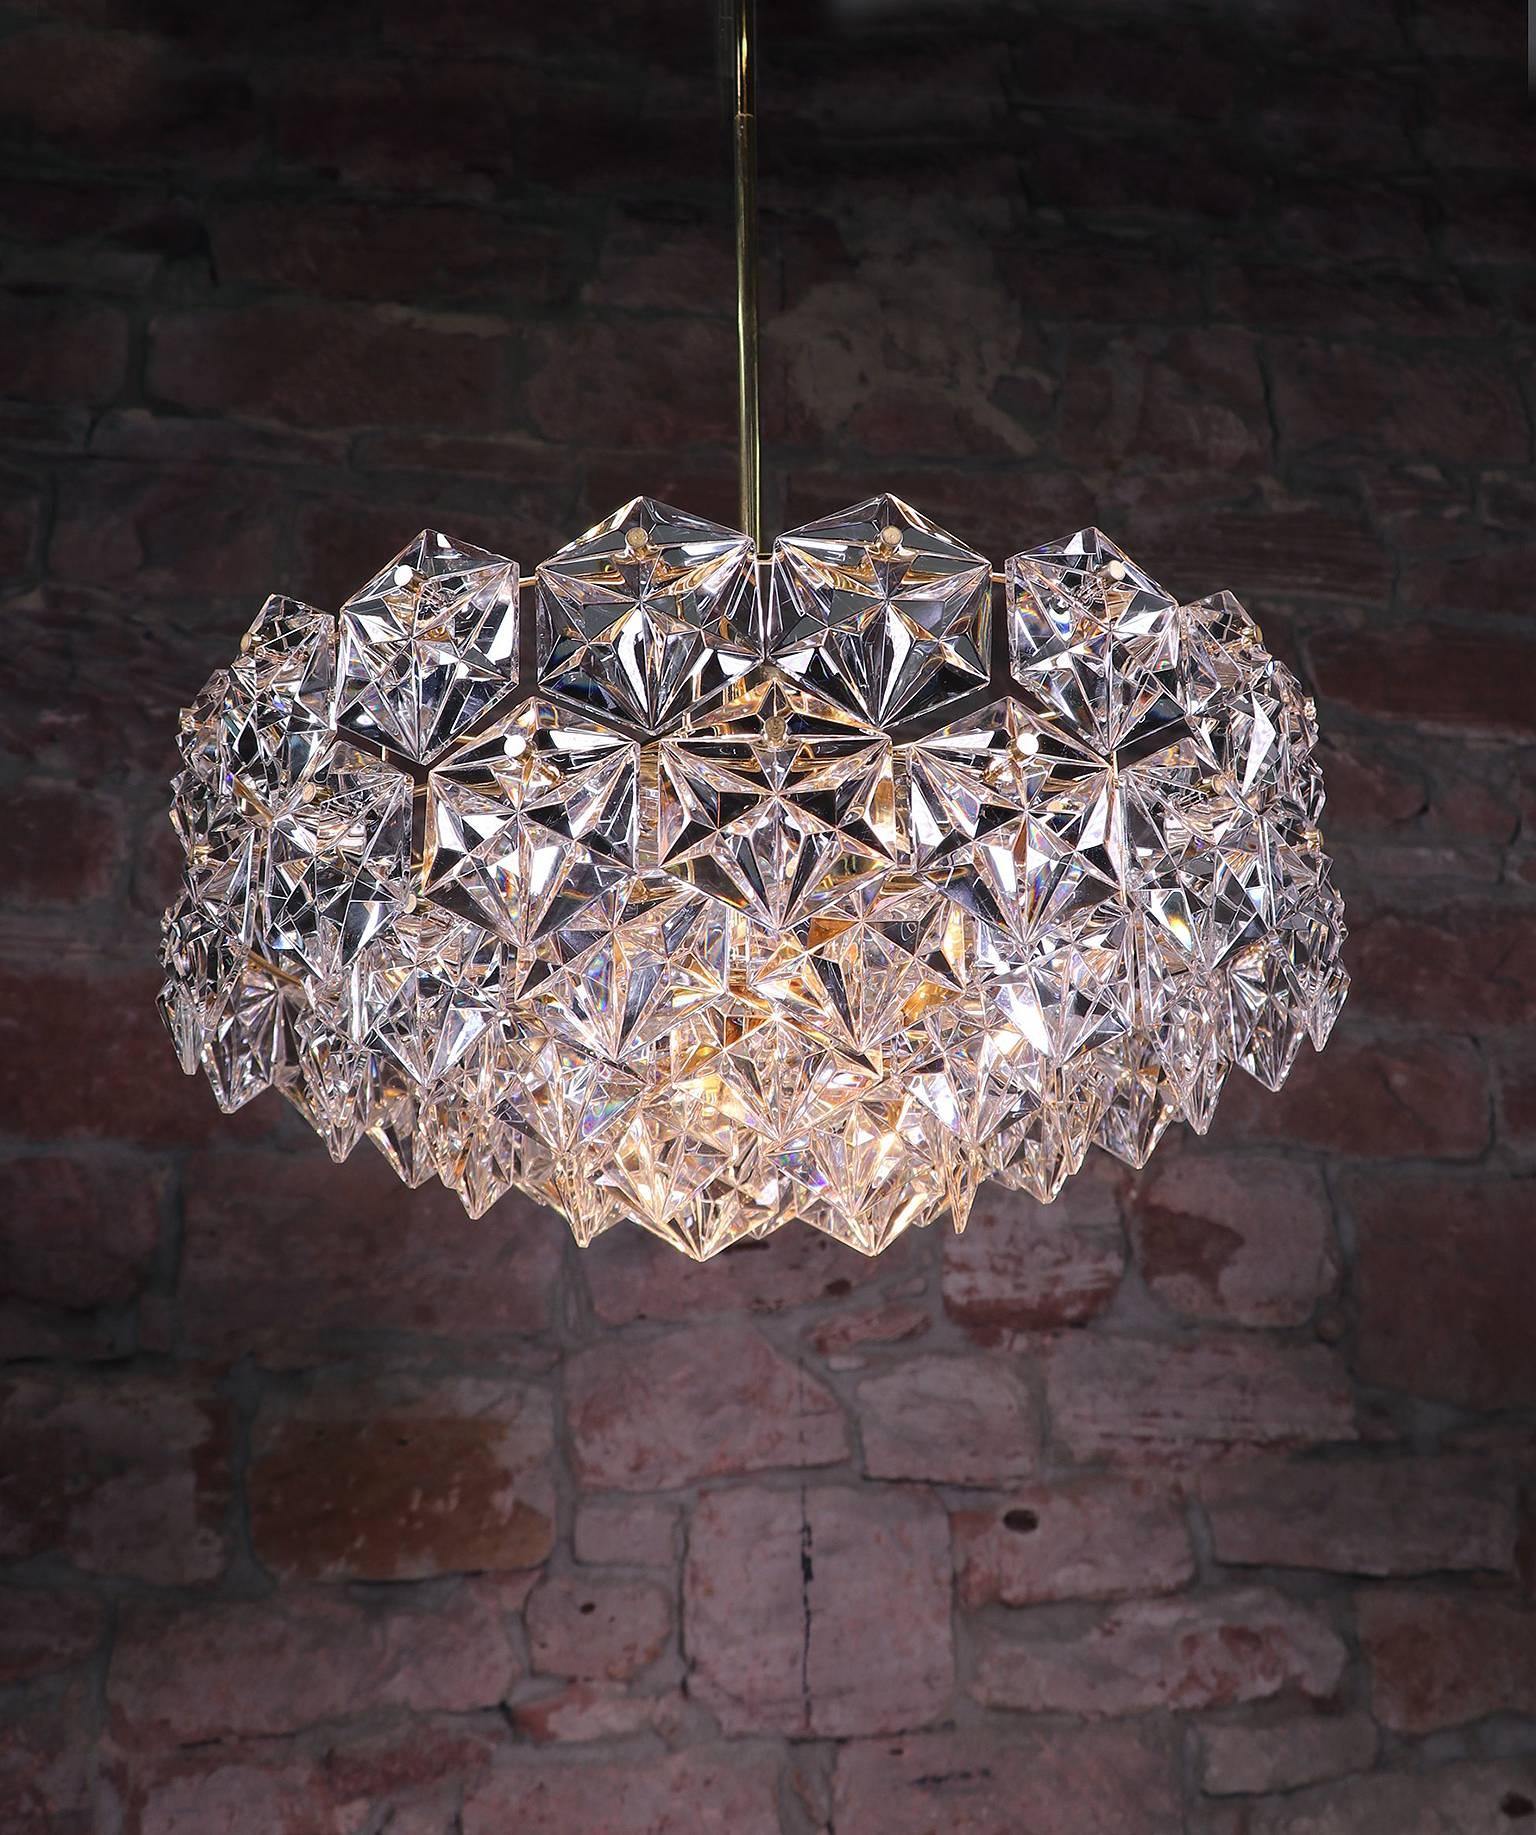 Elegant large five-tier chandelier with faceted crystals on a gold-plated brass frame. Manufactured by Kinkeldey, Germany, in the 1960s.

Adjustability: the rod is divided and can be adjusted as required for greater or lesser drop. 
Lighting: takes